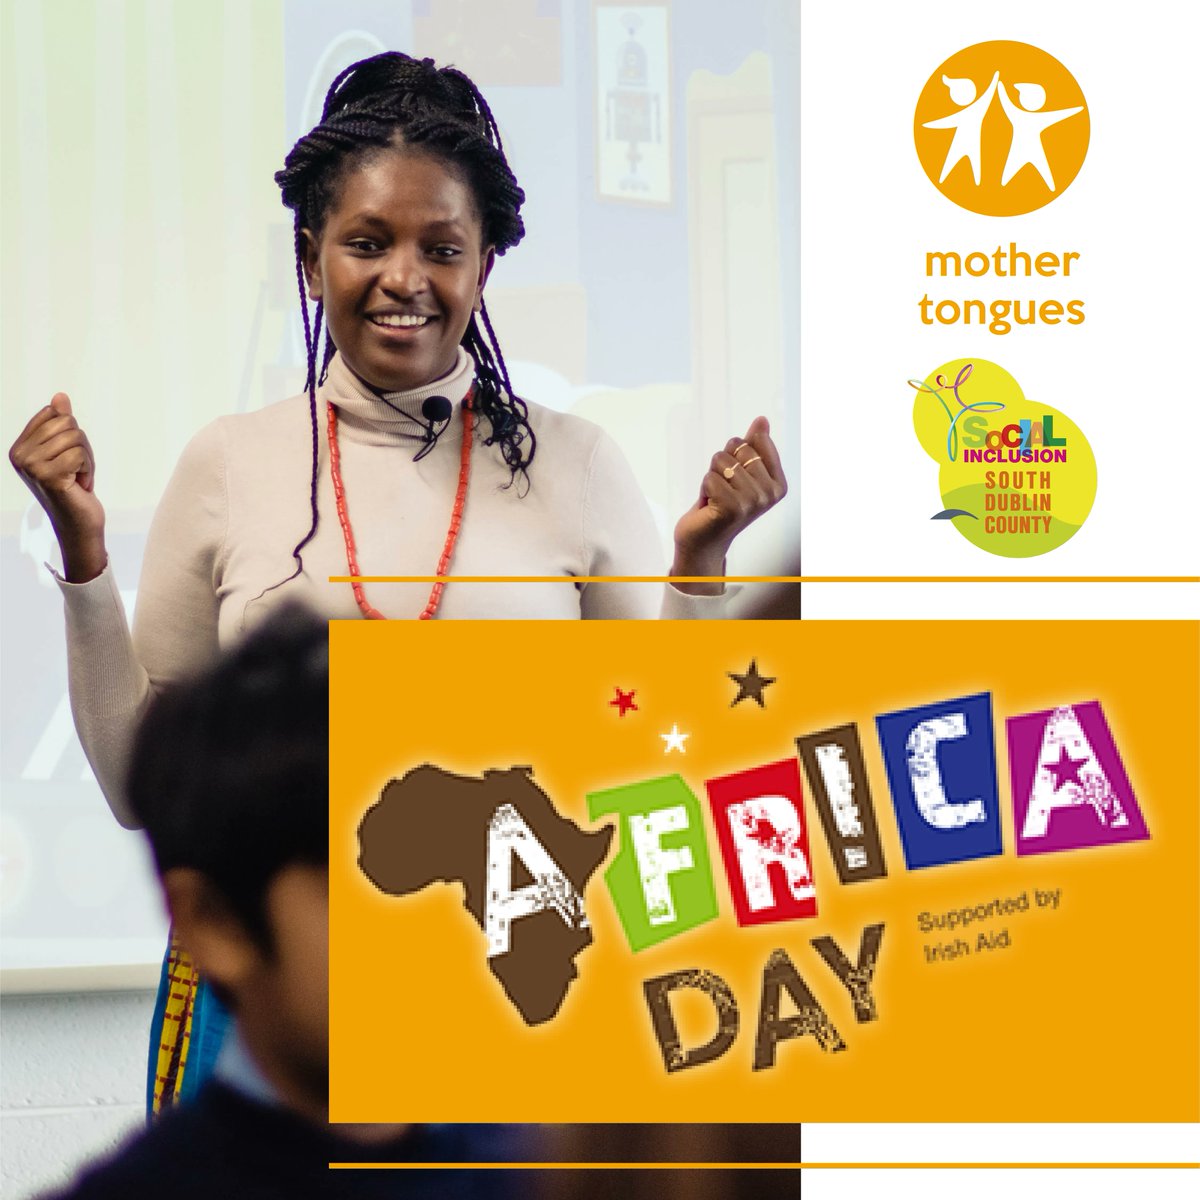 Celebrate @AfricaDay with us! Join @j_nantale, Irish Ugandan artist, singer and educator in this family event for children 6-12 y.o. May 26th,@RuaRed #Tallaght Book your free place 👇 buff.ly/3L3jjmt #AfricaDay2022 @riainetwork @Black_andirish @SDCCArts @tallaghtecho